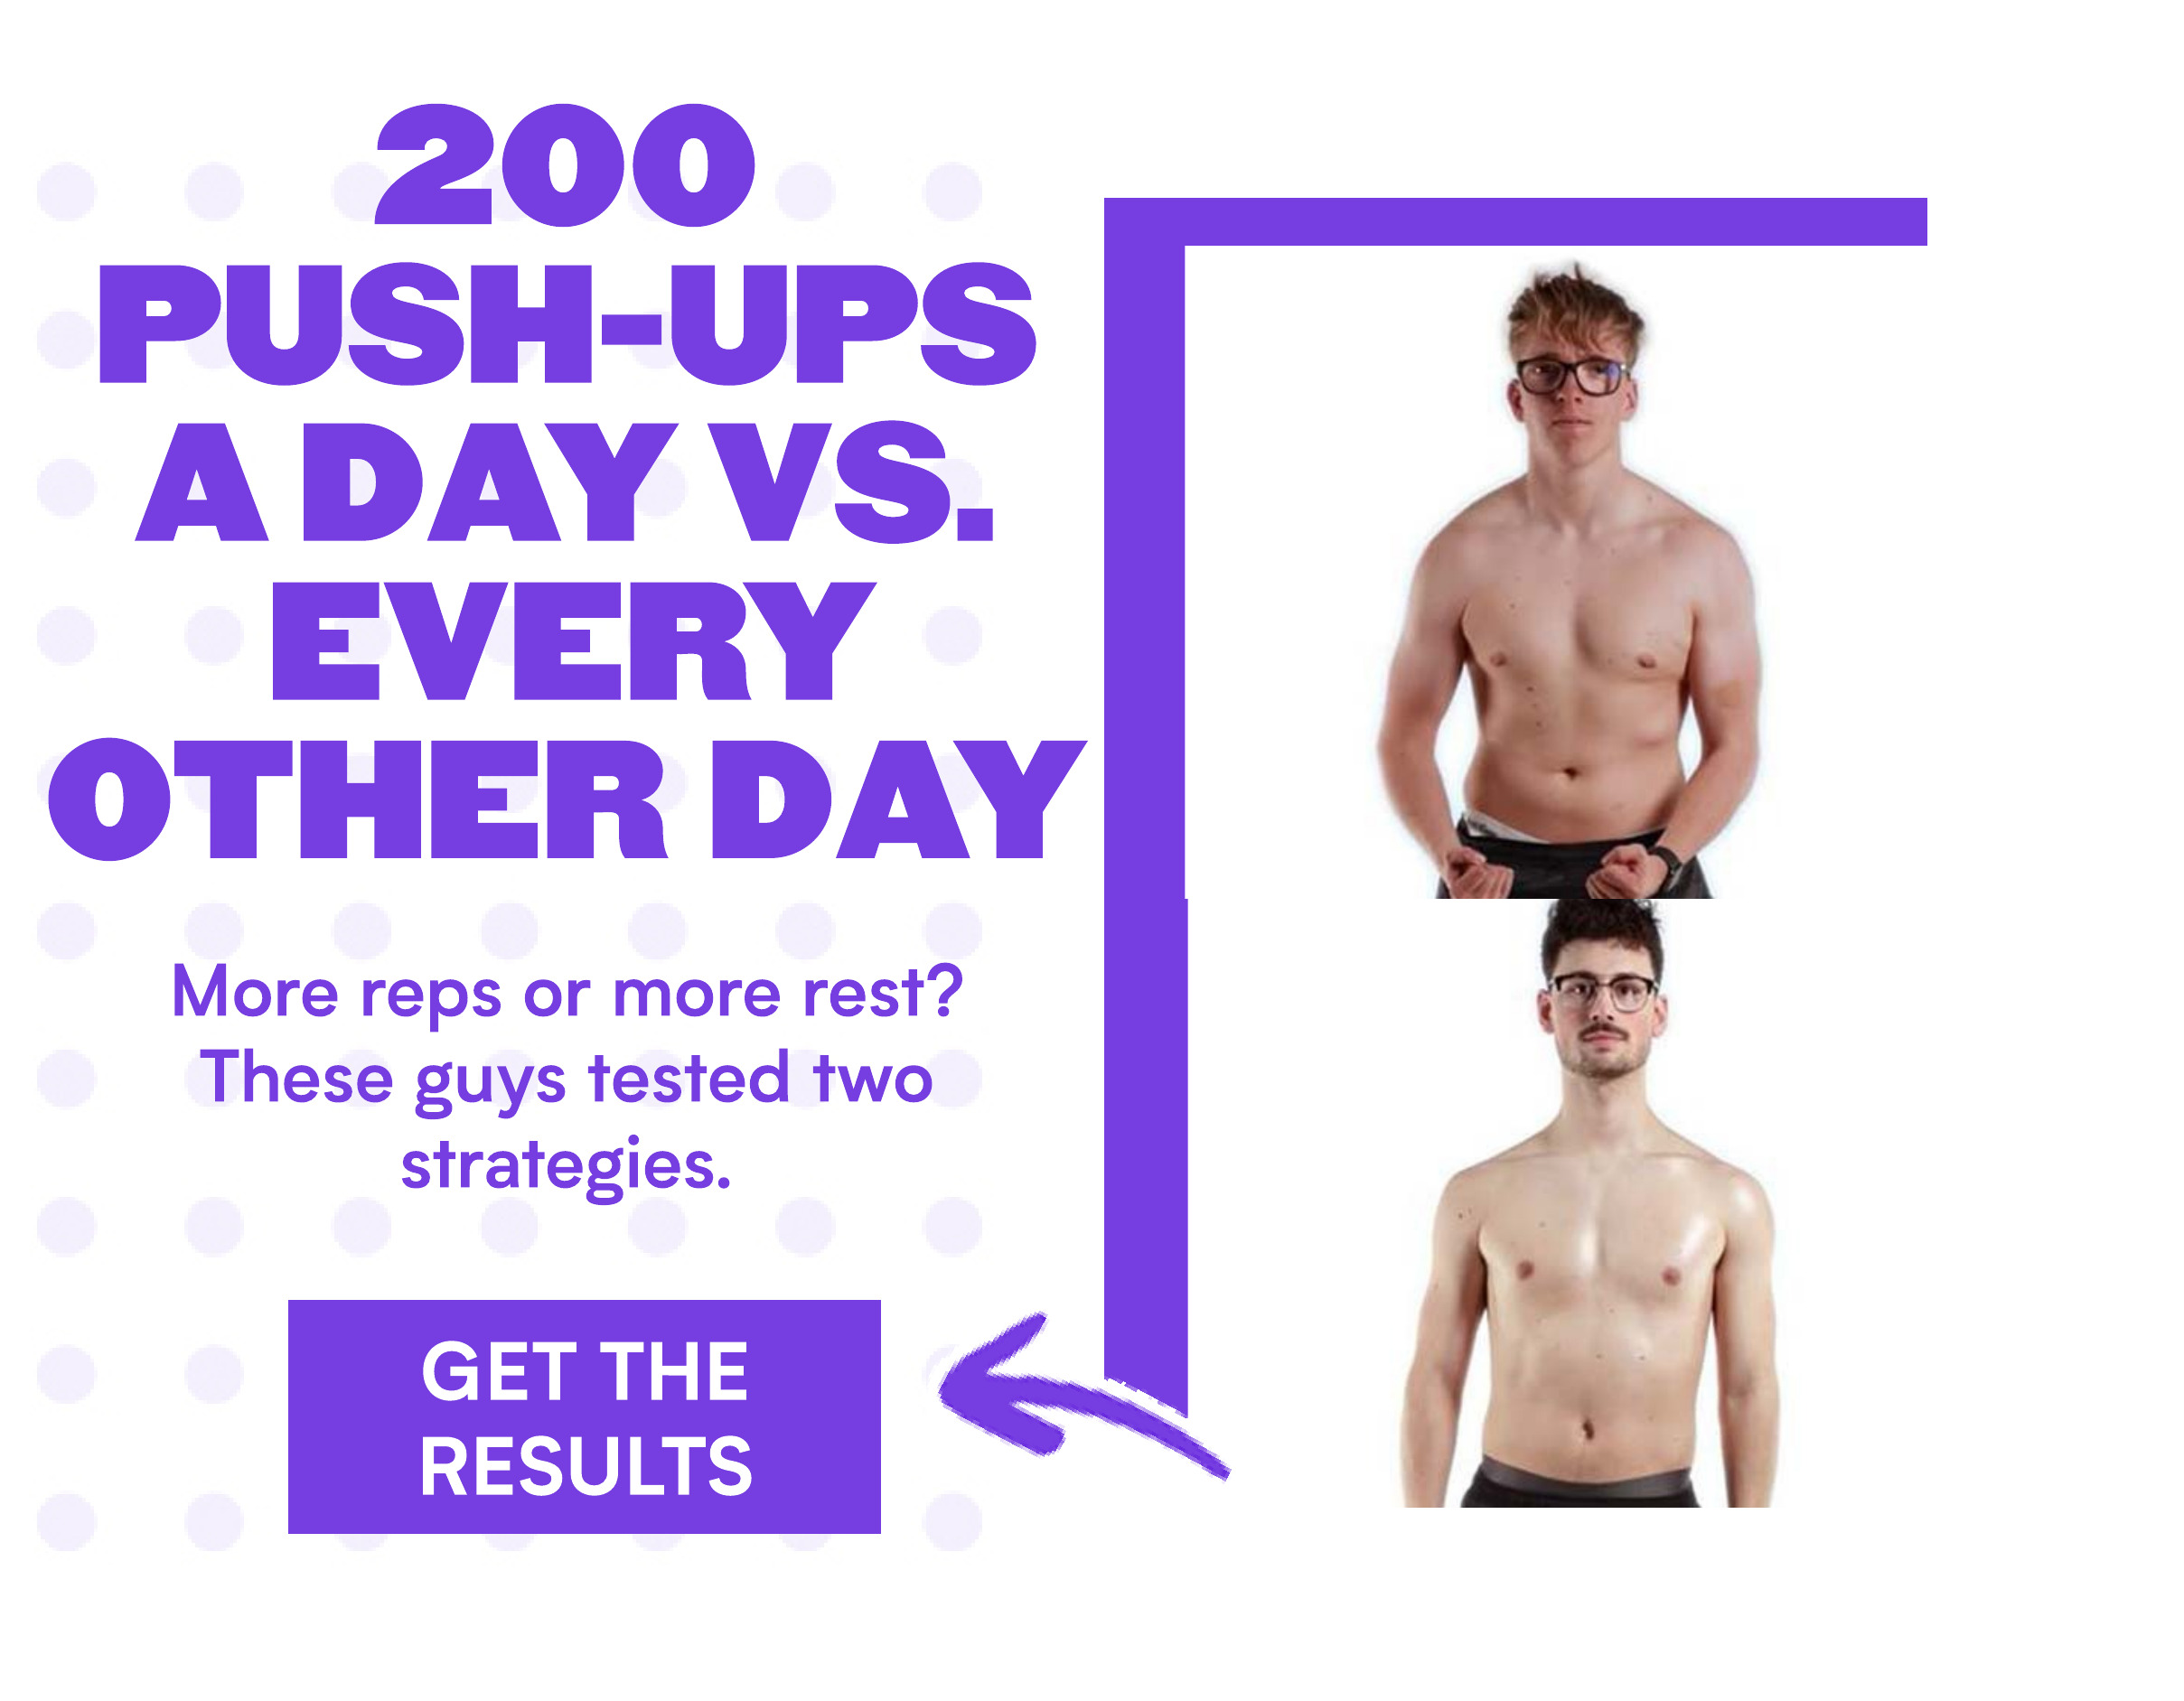 200 PUSH-UPS ADAY VS. EVERY OTHER DAY More reps or more rest? These guys tested two strategies. GET THE RESULTS 